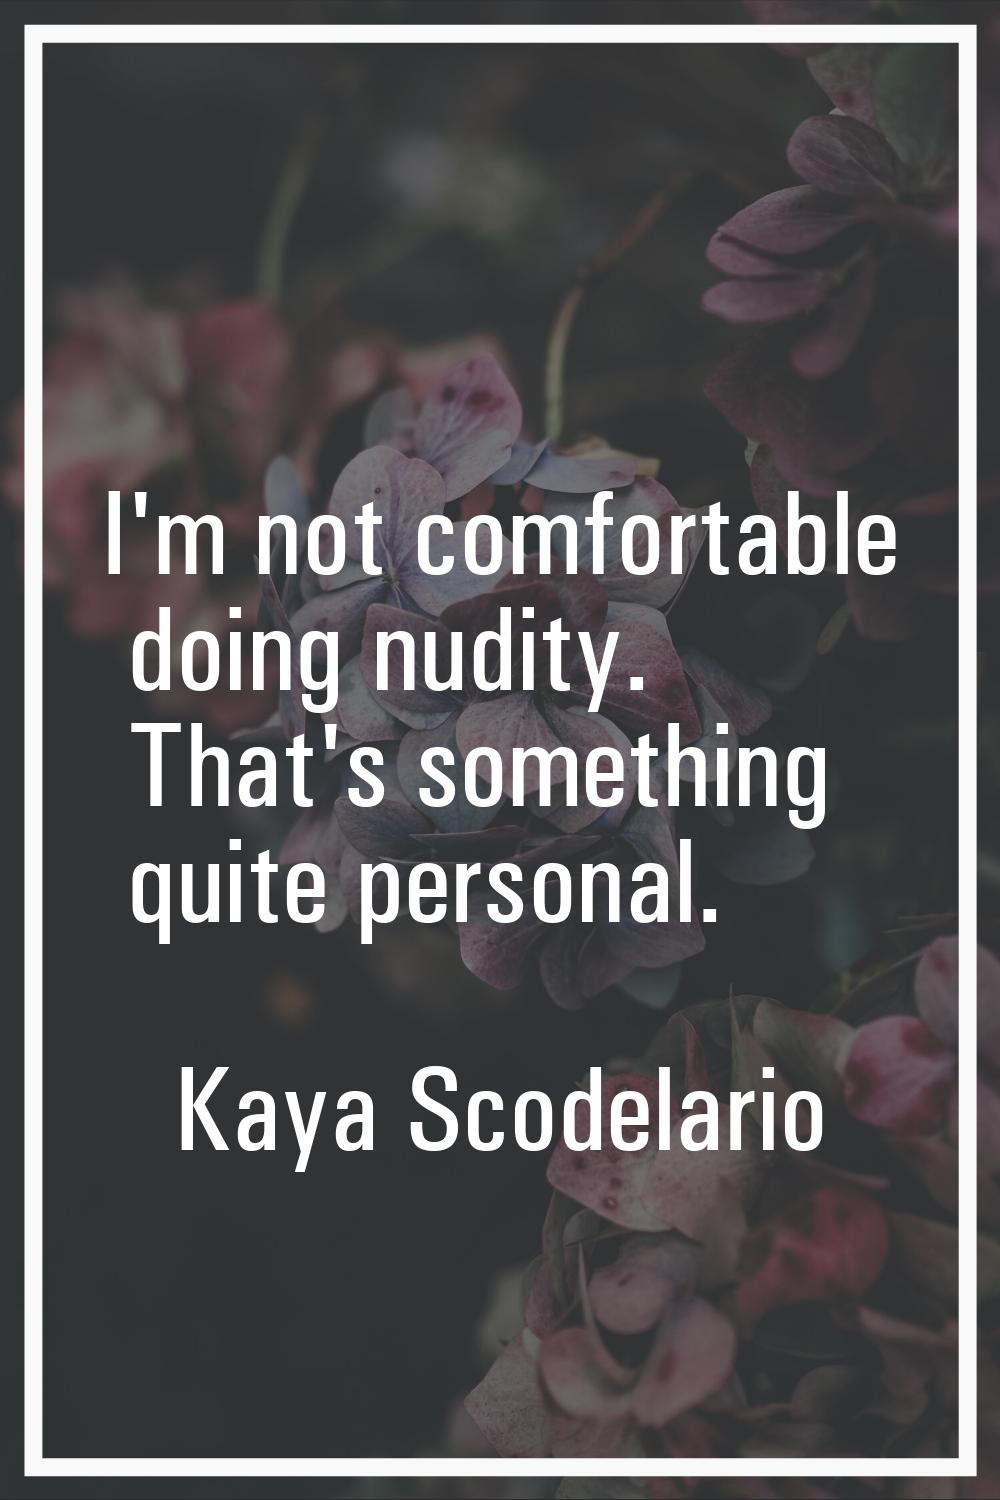 I'm not comfortable doing nudity. That's something quite personal.